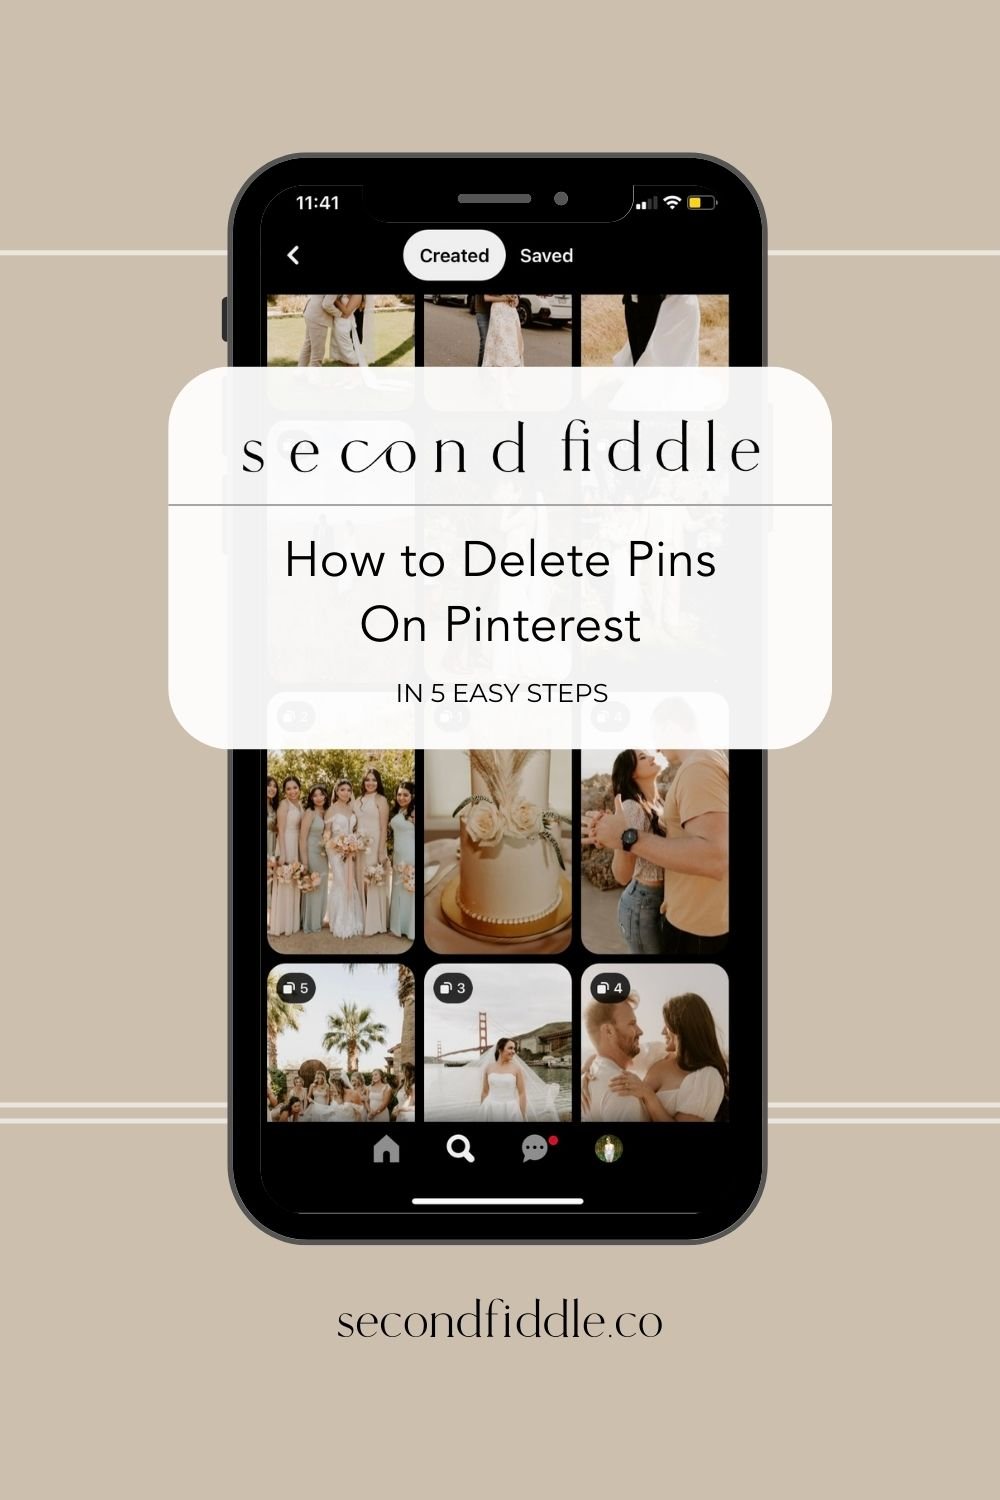 How to Delete Pins on Pinterest (5 Easy Steps)